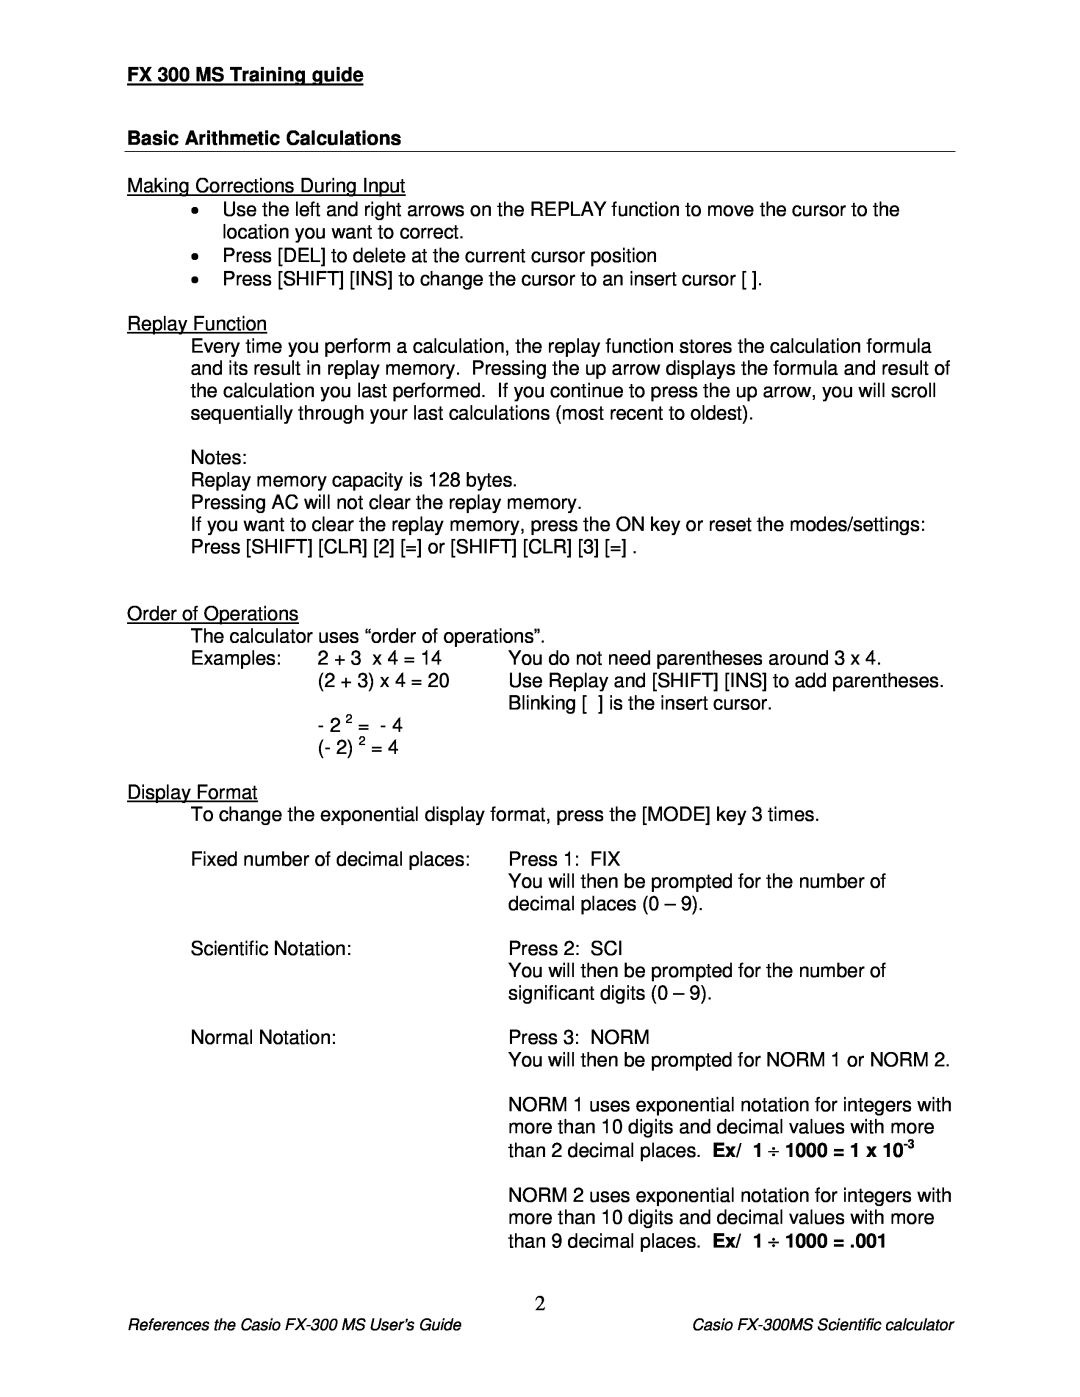 Delta manual FX 300 MS Training guide Basic Arithmetic Calculations 